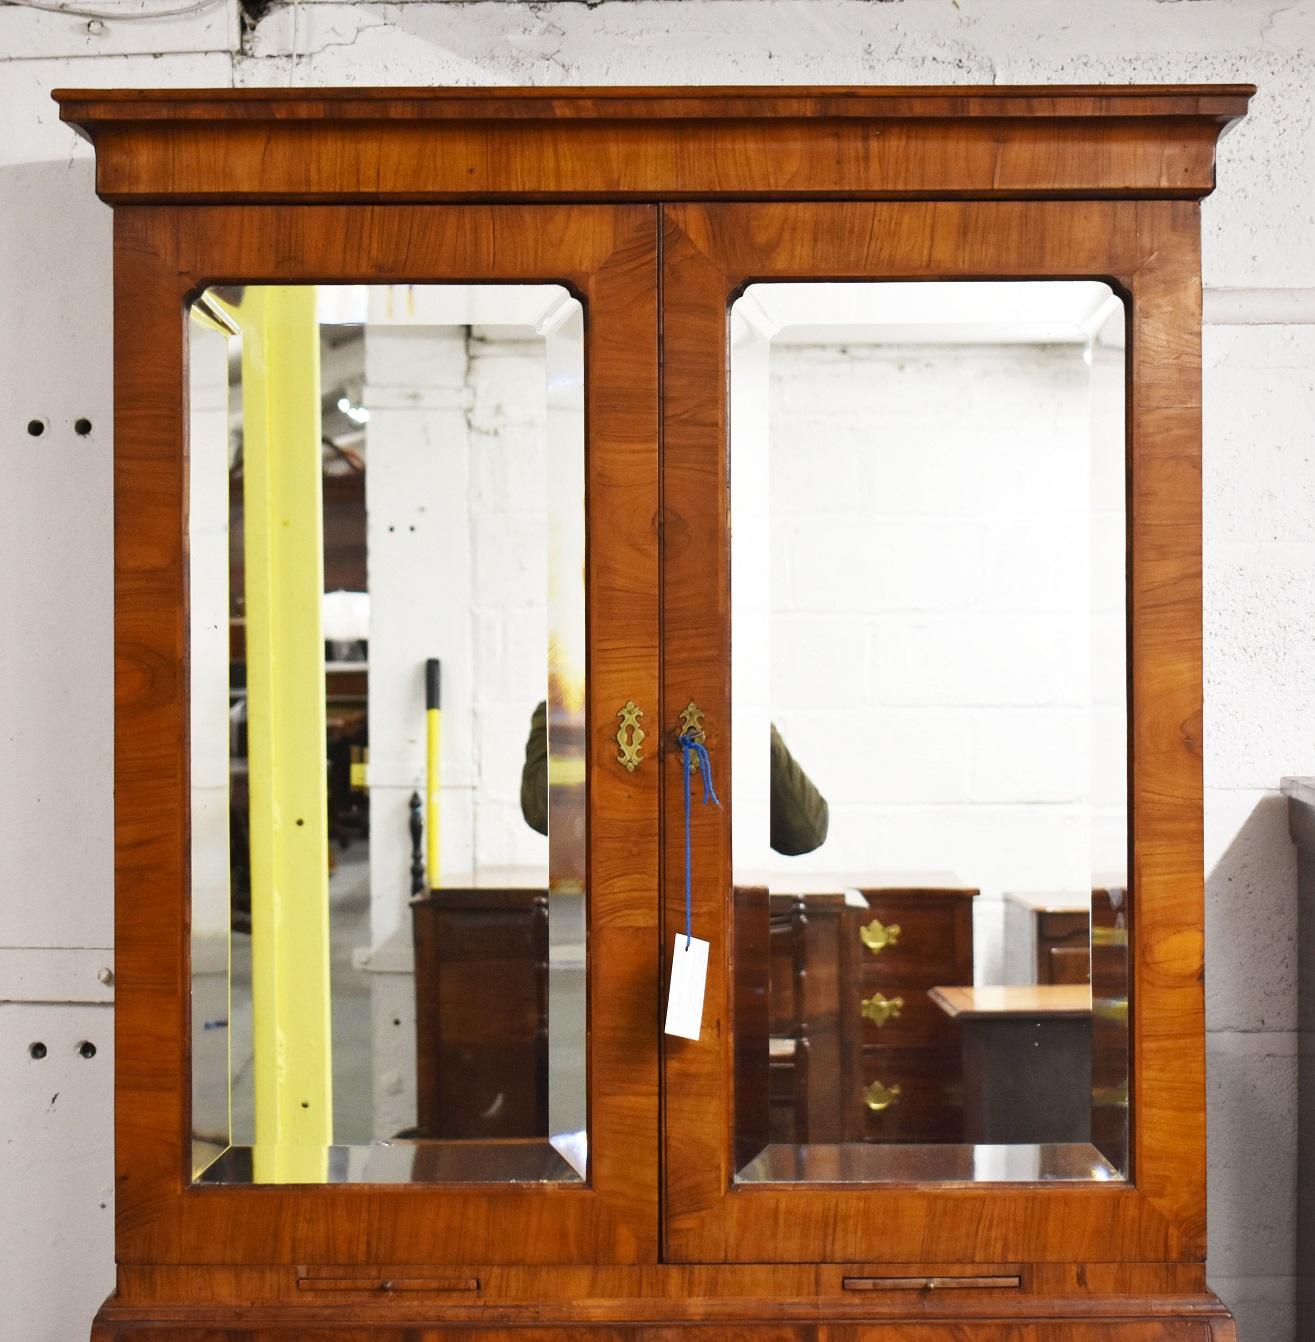 For sale is a good quality George II figured walnut bureau bookcase. The bookcase has an out swept cornice, above a pair of beveled mirror doors opening to reveal adjustable shelves, with two candle slides below, above a fall front. The fall opens